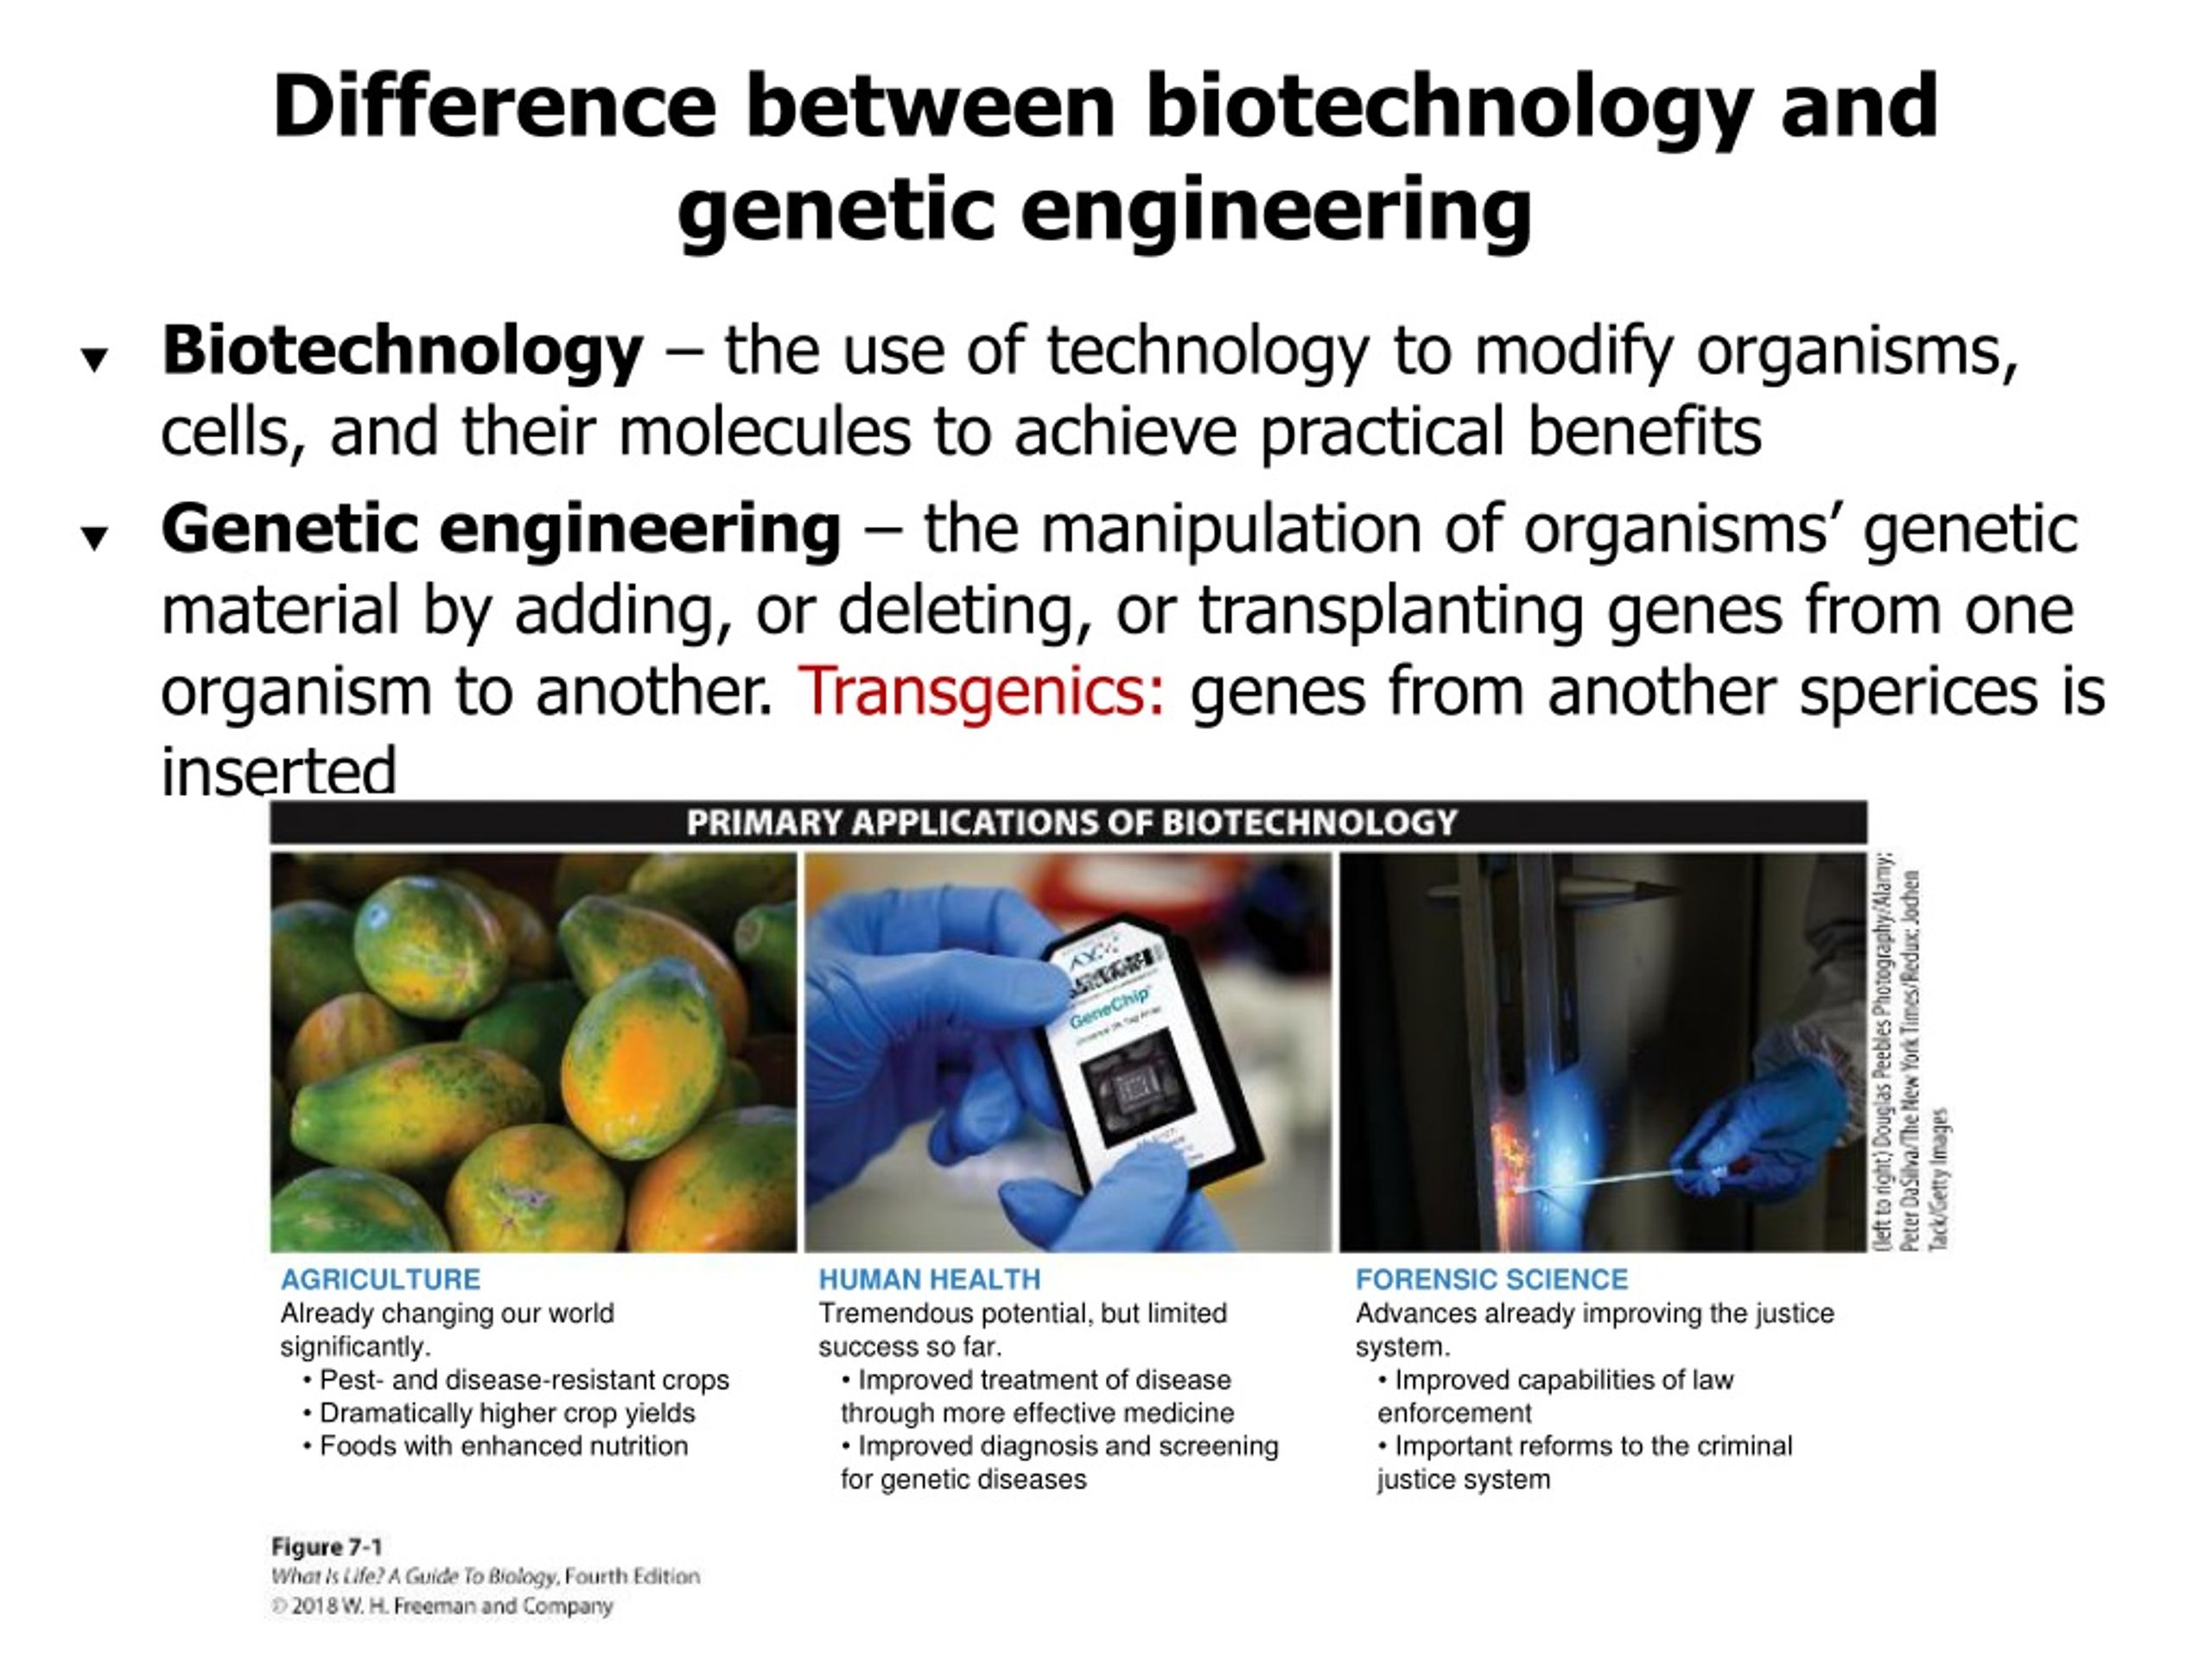 PPT Difference between biotechnology and engineering